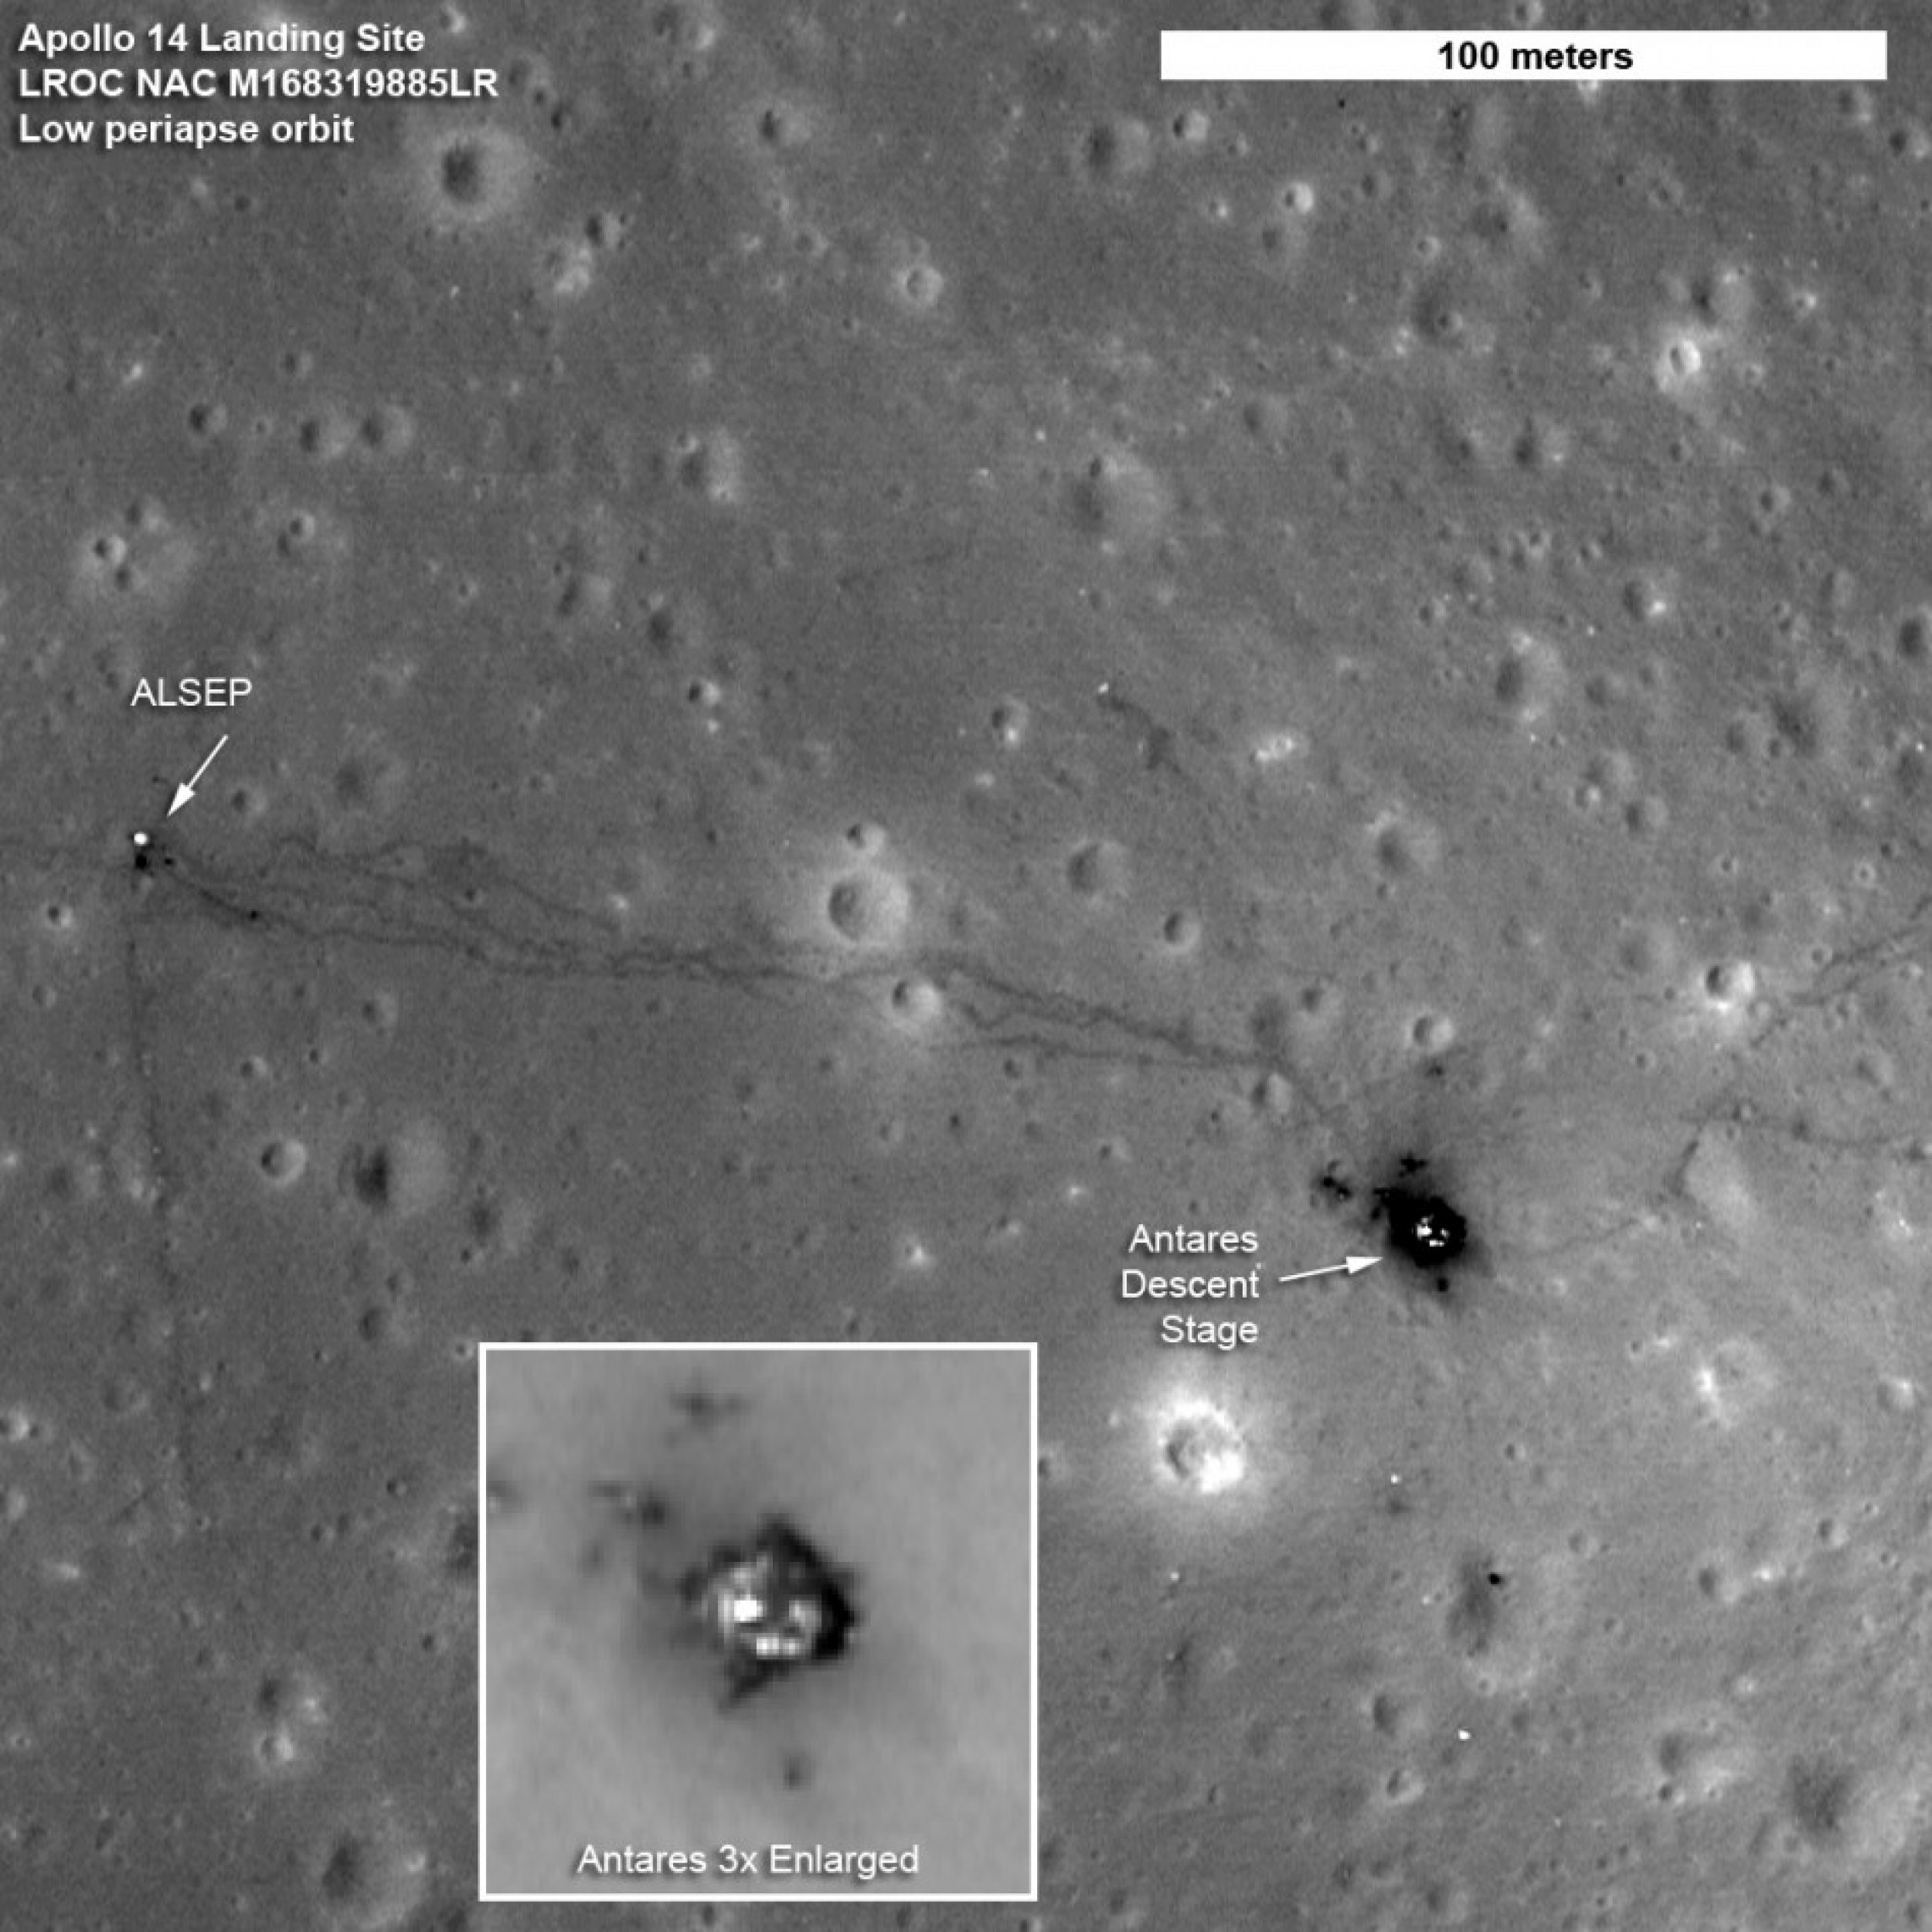 The paths left by astronauts Alan Shepard and Edgar Mitchell on both Apollo 14 moon walks are visible in this LRO image